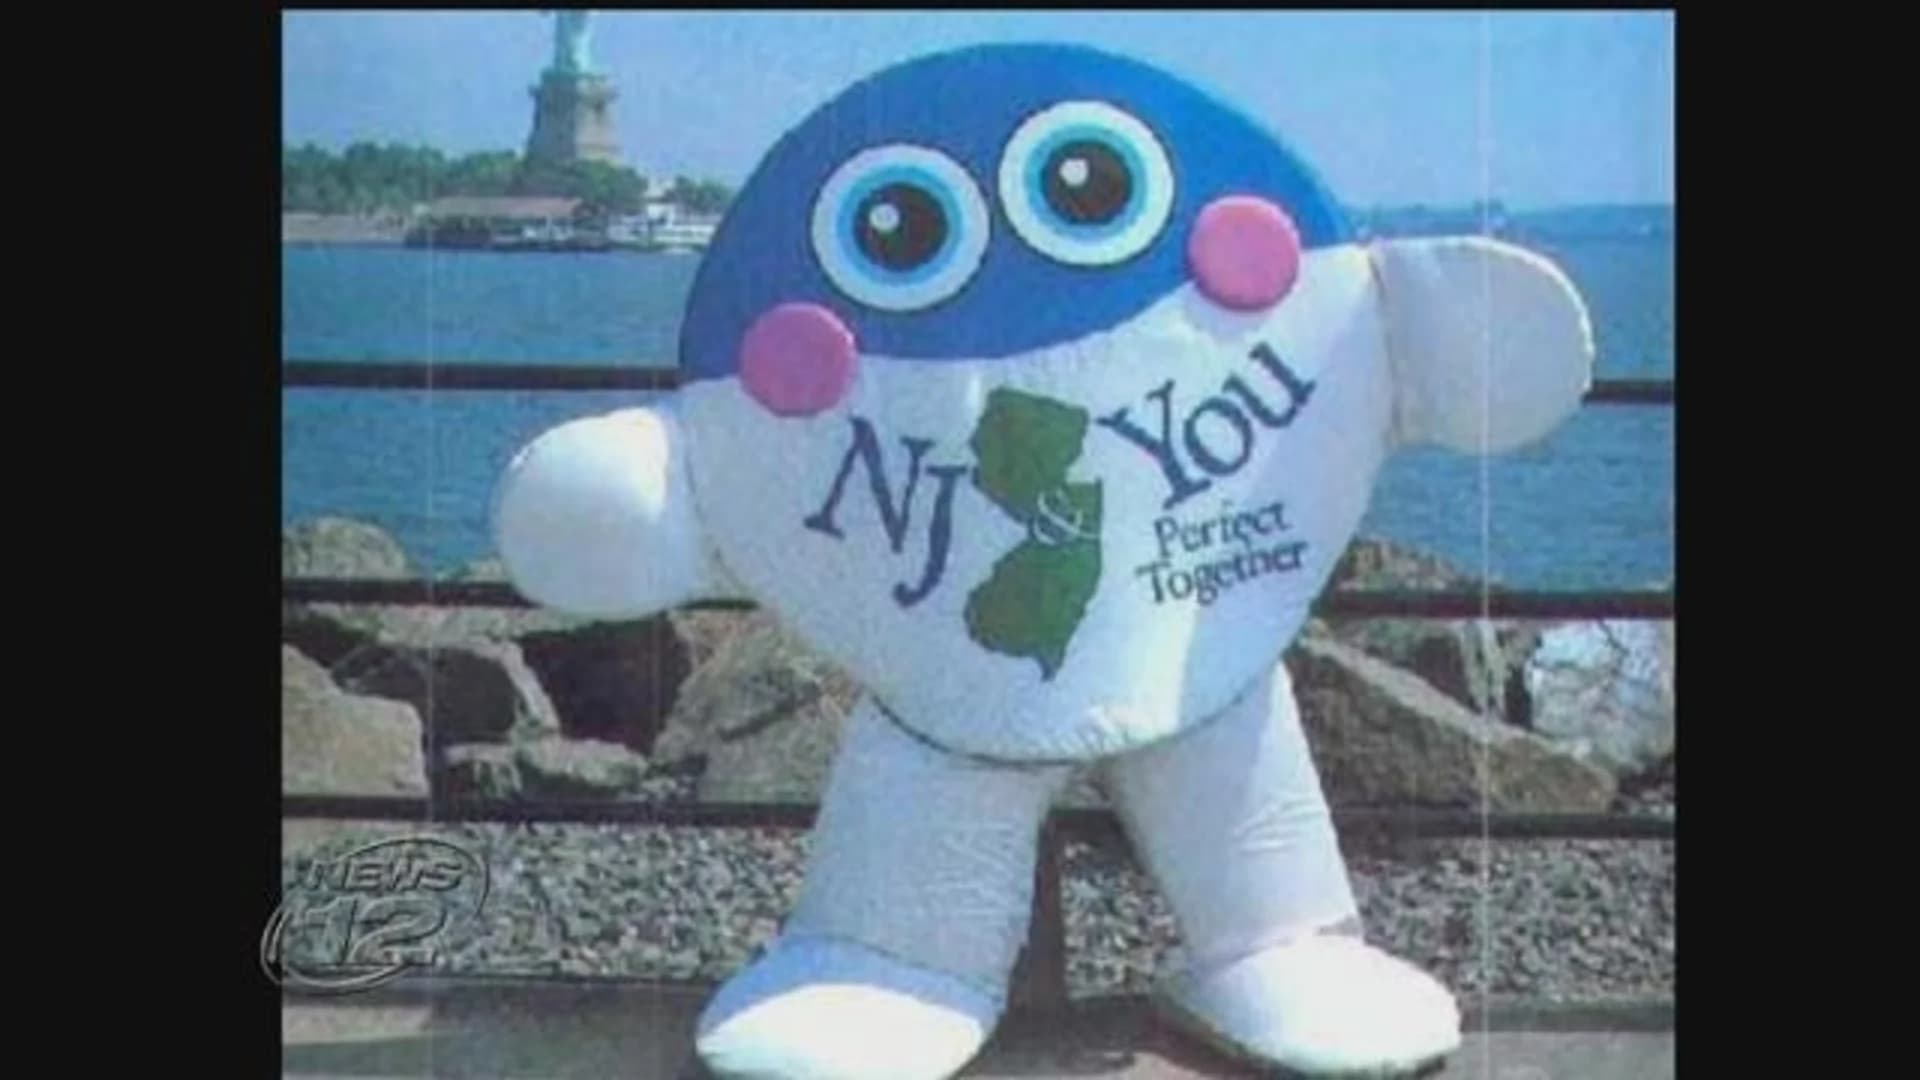 Have you seen me? News 12 searches for former NJ mascot